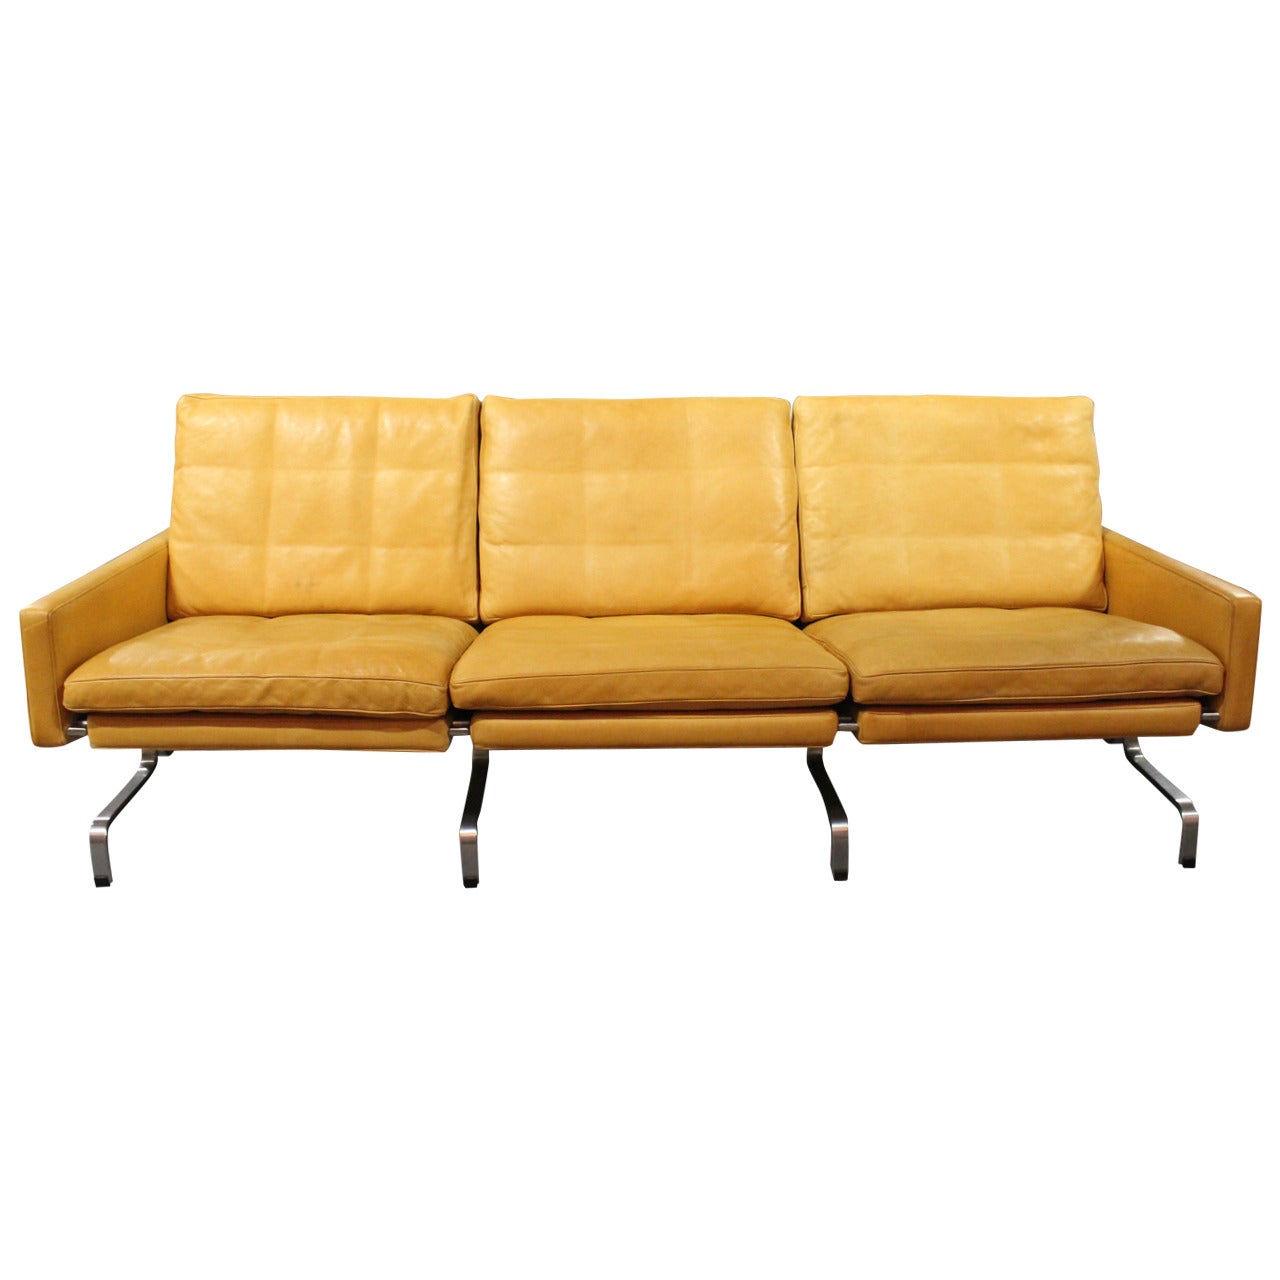 3 Pers. Sofa Model PK31/3 By Poul Kjærholm Made By Fritz Hansen From 1997s For Sale